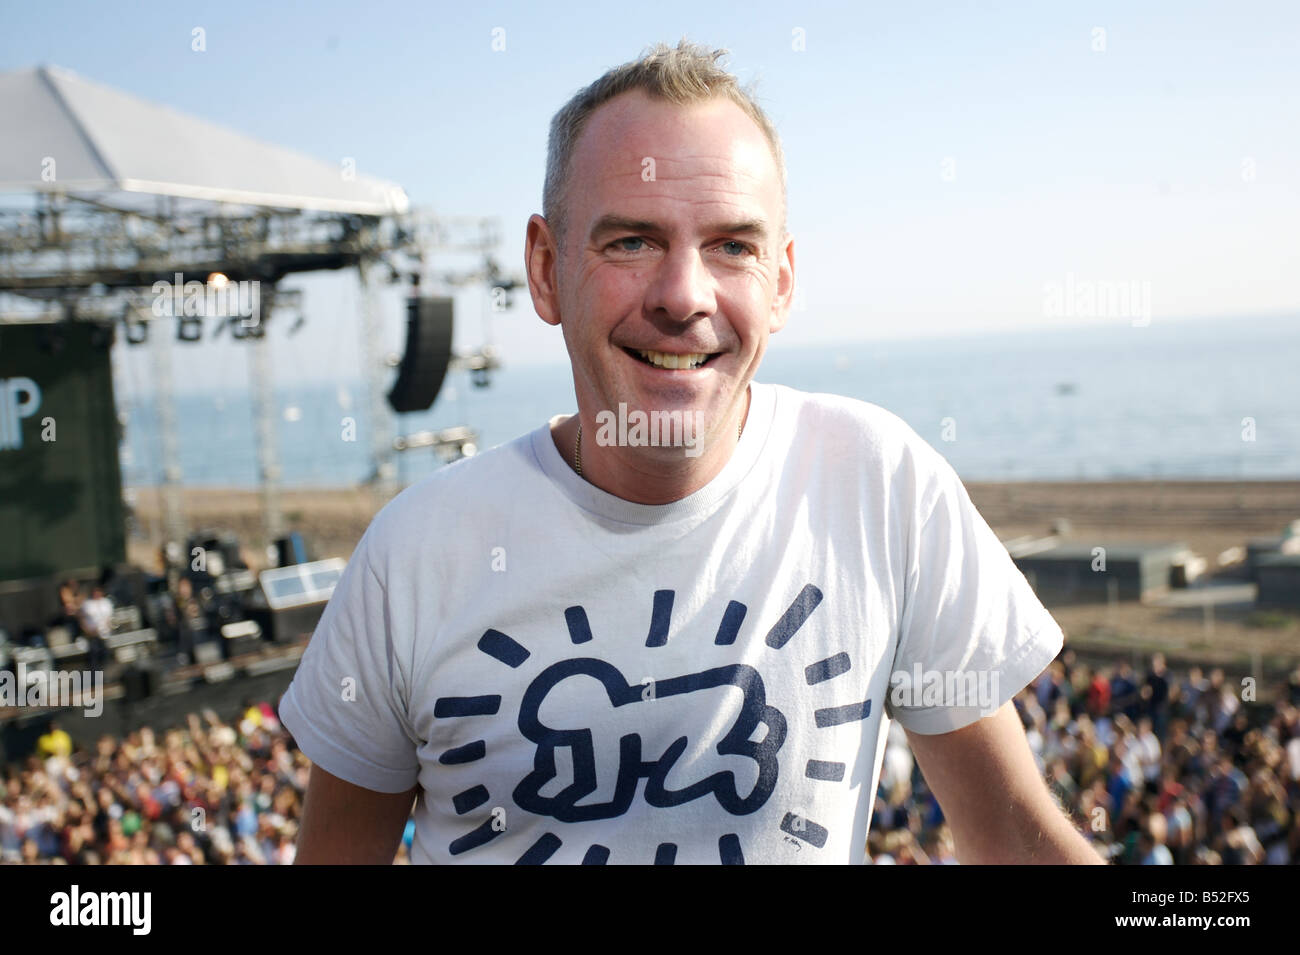 Fat boy slim gets ready for the Big Boutique Beach party Stock Photo